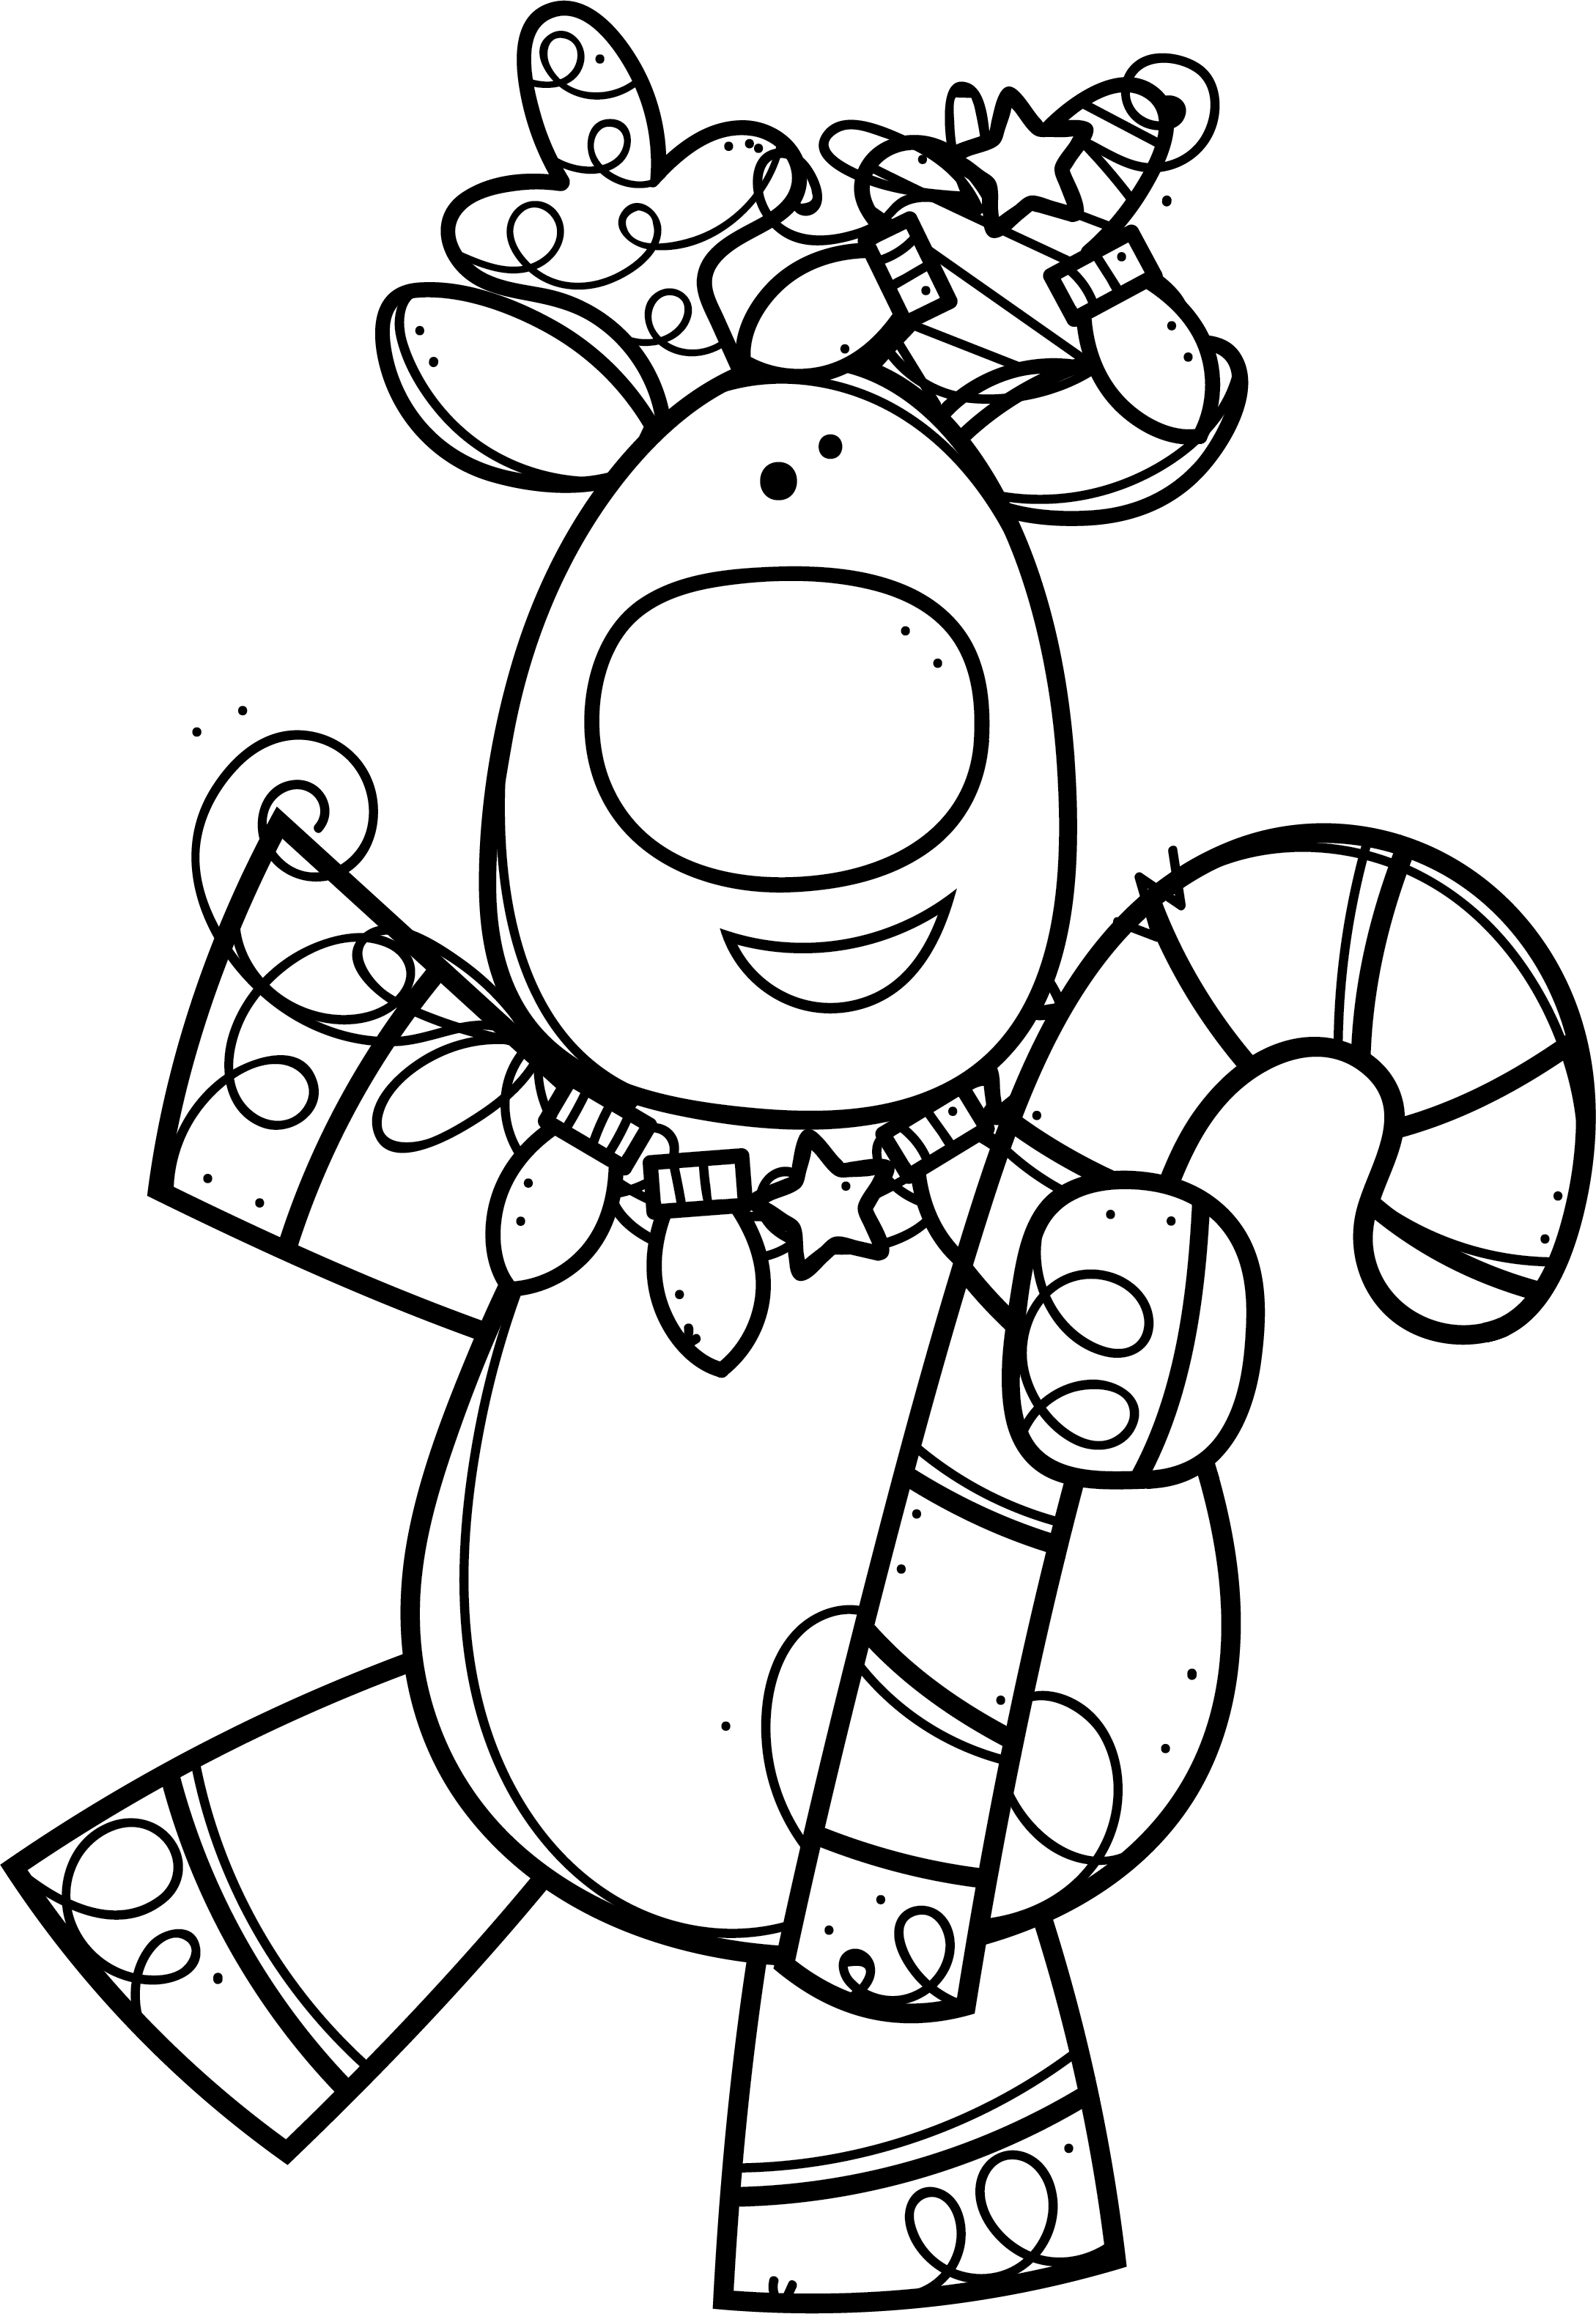 Pin by cecii rdz on png por mes o estaciãn christmas coloring pages christmas drawing cute coloring pages